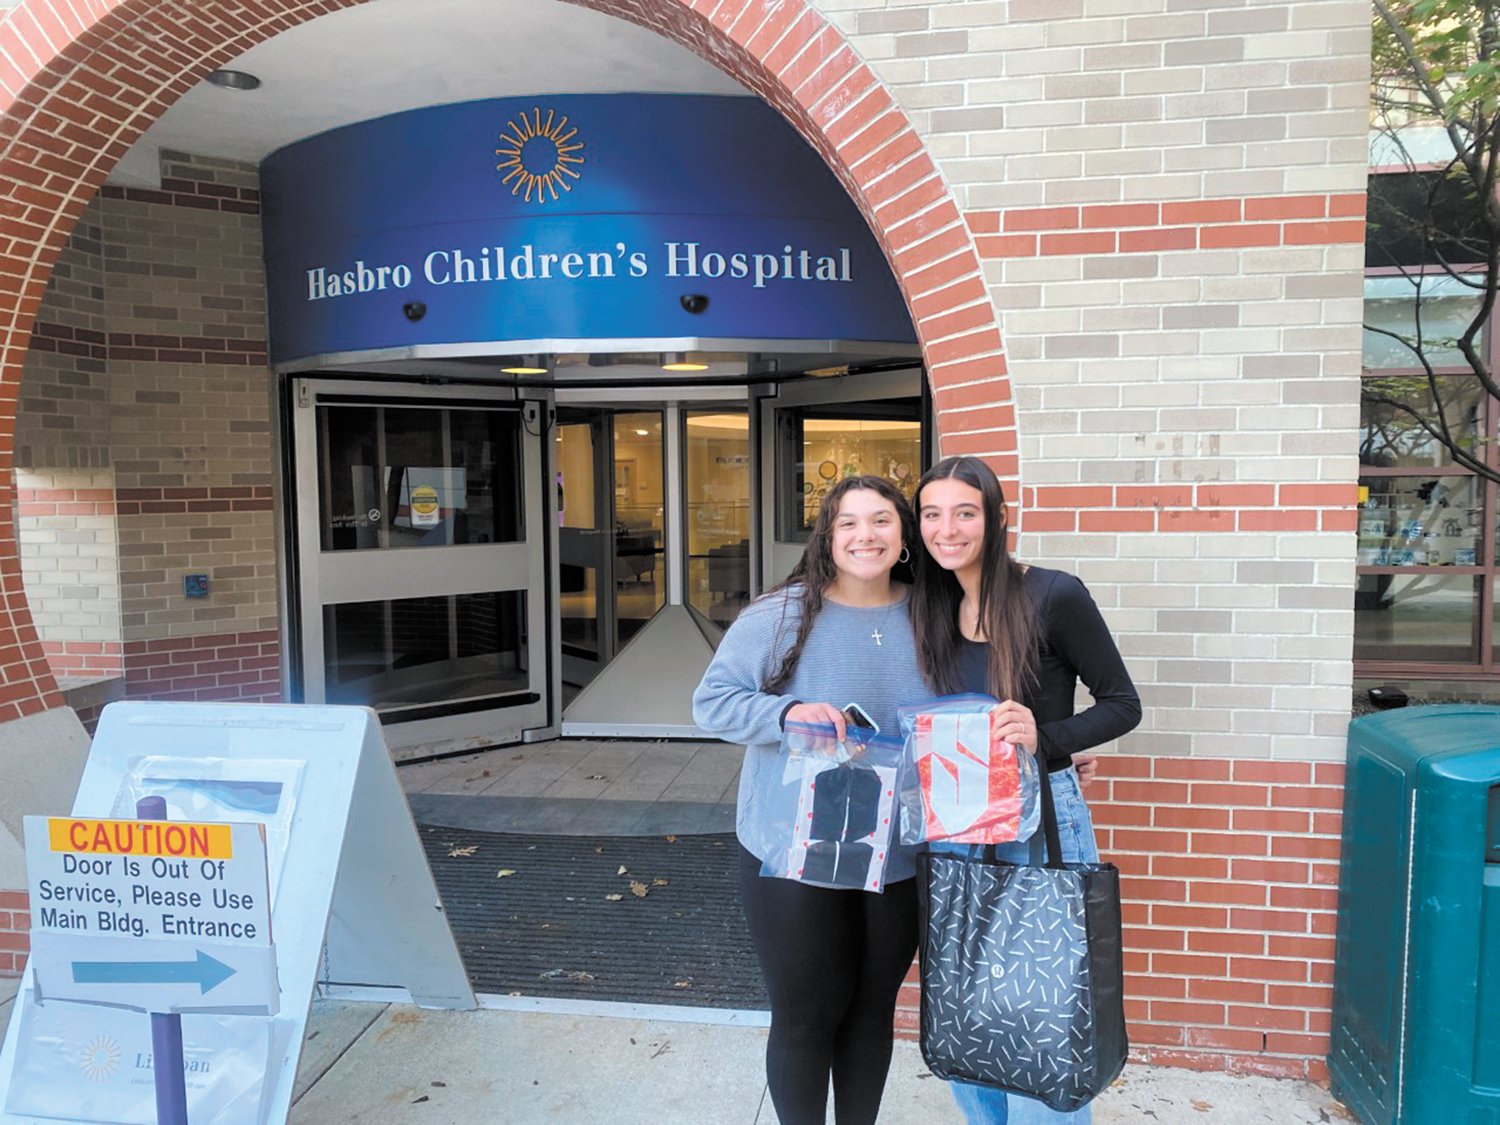 FOR ALL THE SUPERHEROS: Juniors Sofia Marella and Thea Marses created superhero capes for kids in Hasbro Children’s Hospital as part of their class project. (Submitted photo)